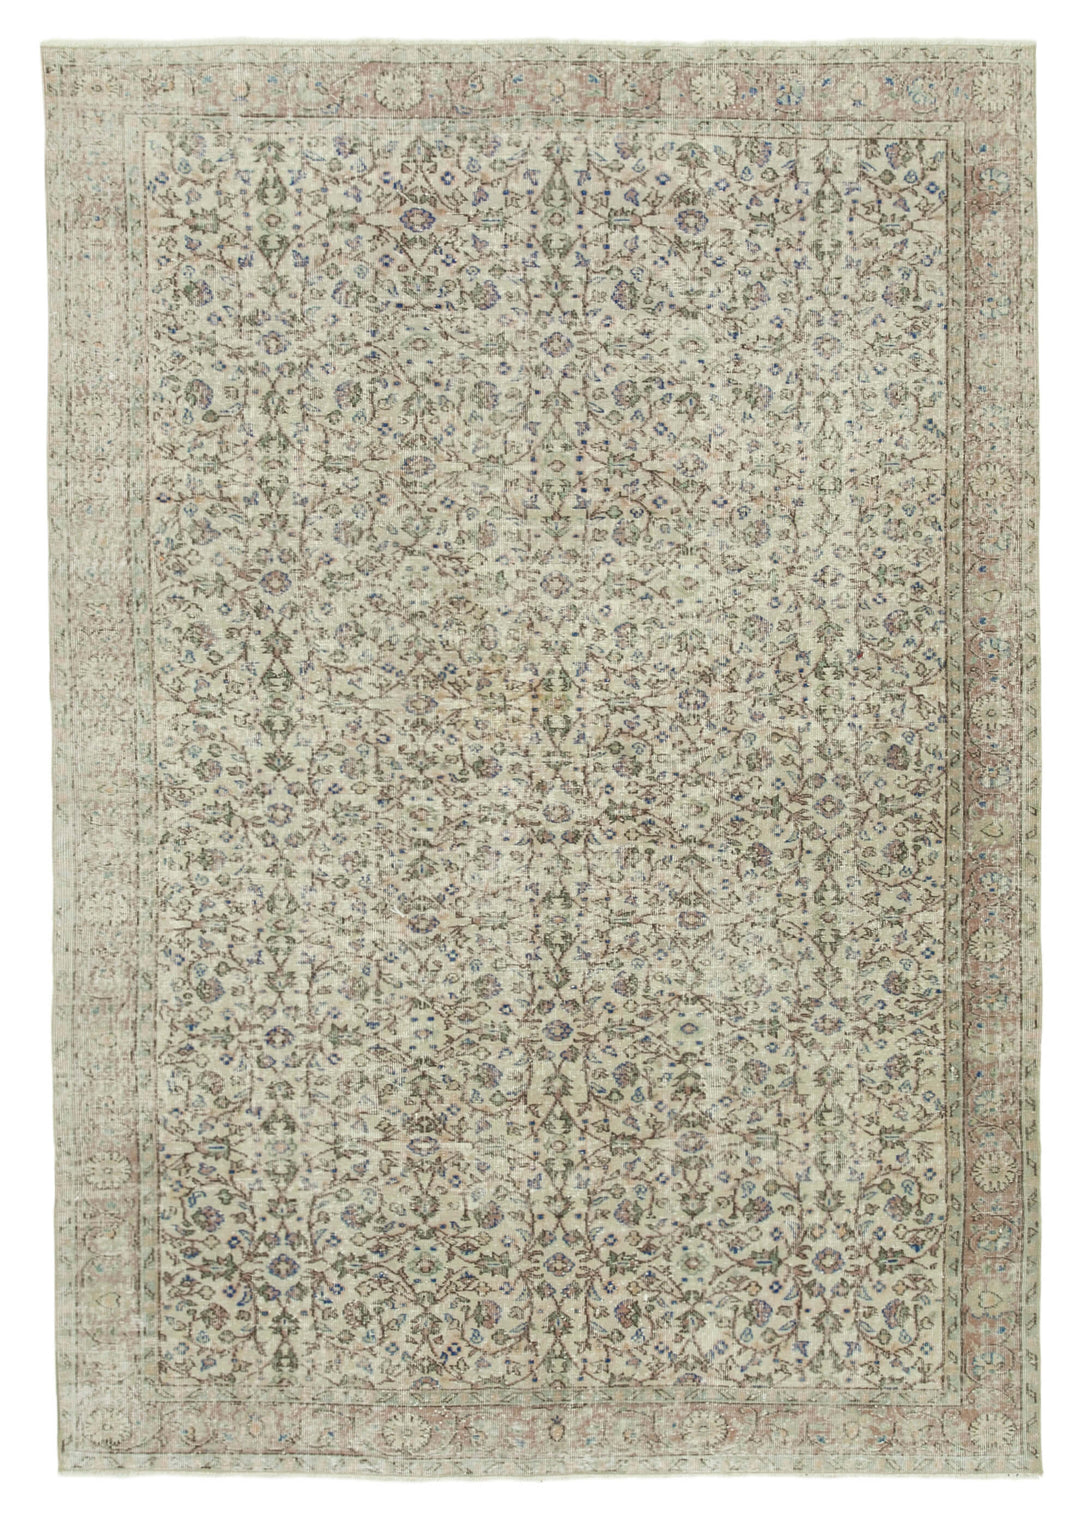 Handmade White Wash Area Rug > Design# OL-AC-36776 > Size: 7'-1" x 10'-6", Carpet Culture Rugs, Handmade Rugs, NYC Rugs, New Rugs, Shop Rugs, Rug Store, Outlet Rugs, SoHo Rugs, Rugs in USA